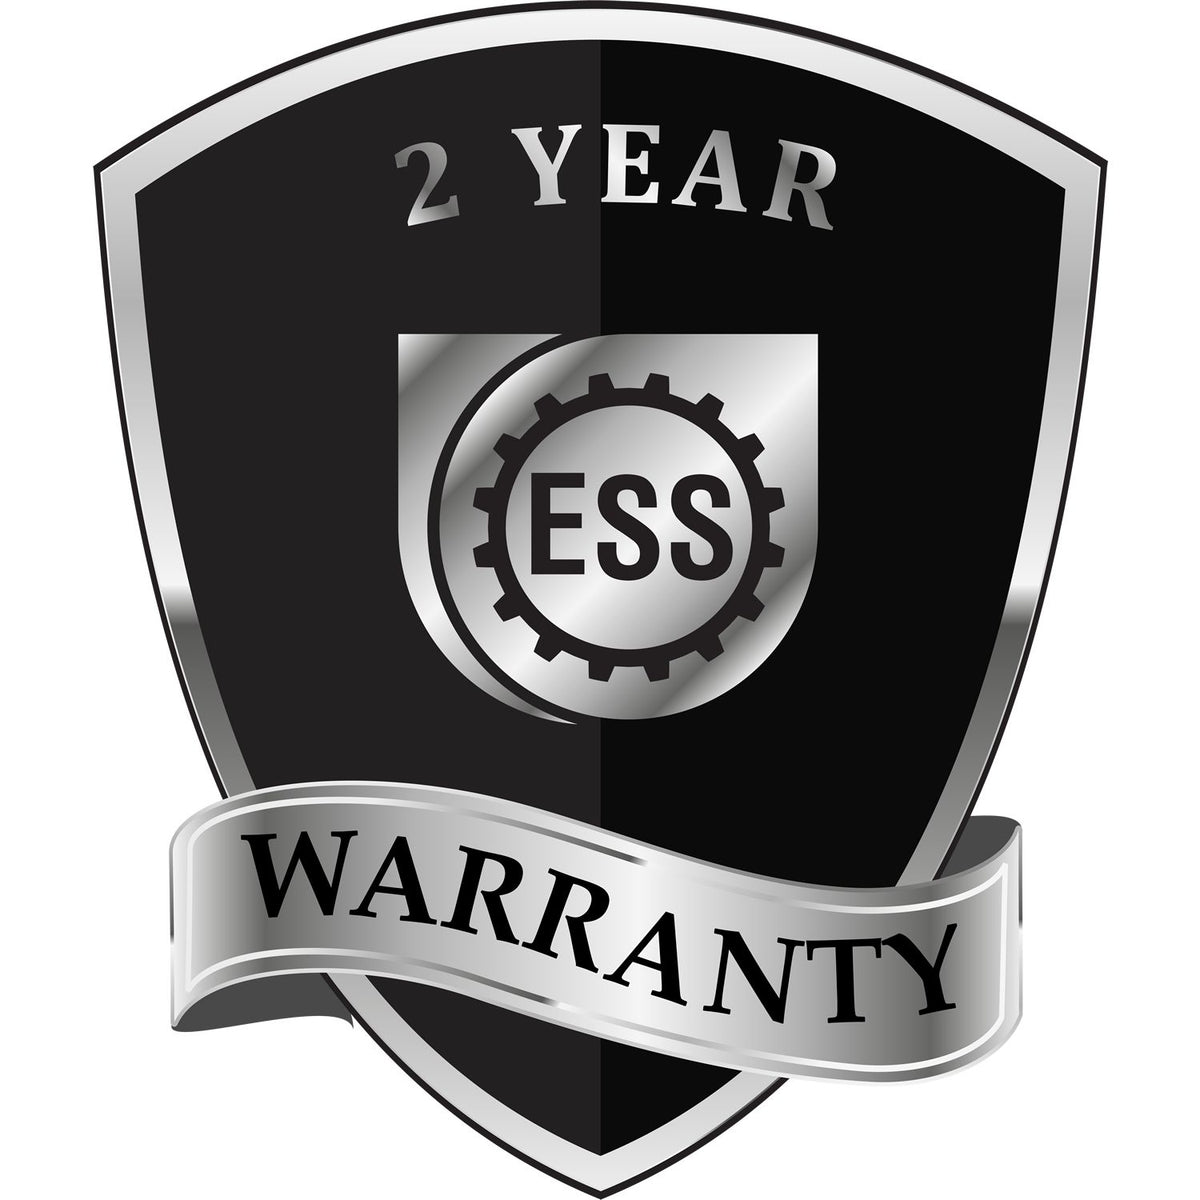 A badge or emblem showing a warranty icon for the Heavy Duty Cast Iron Alabama Engineer Seal Embosser